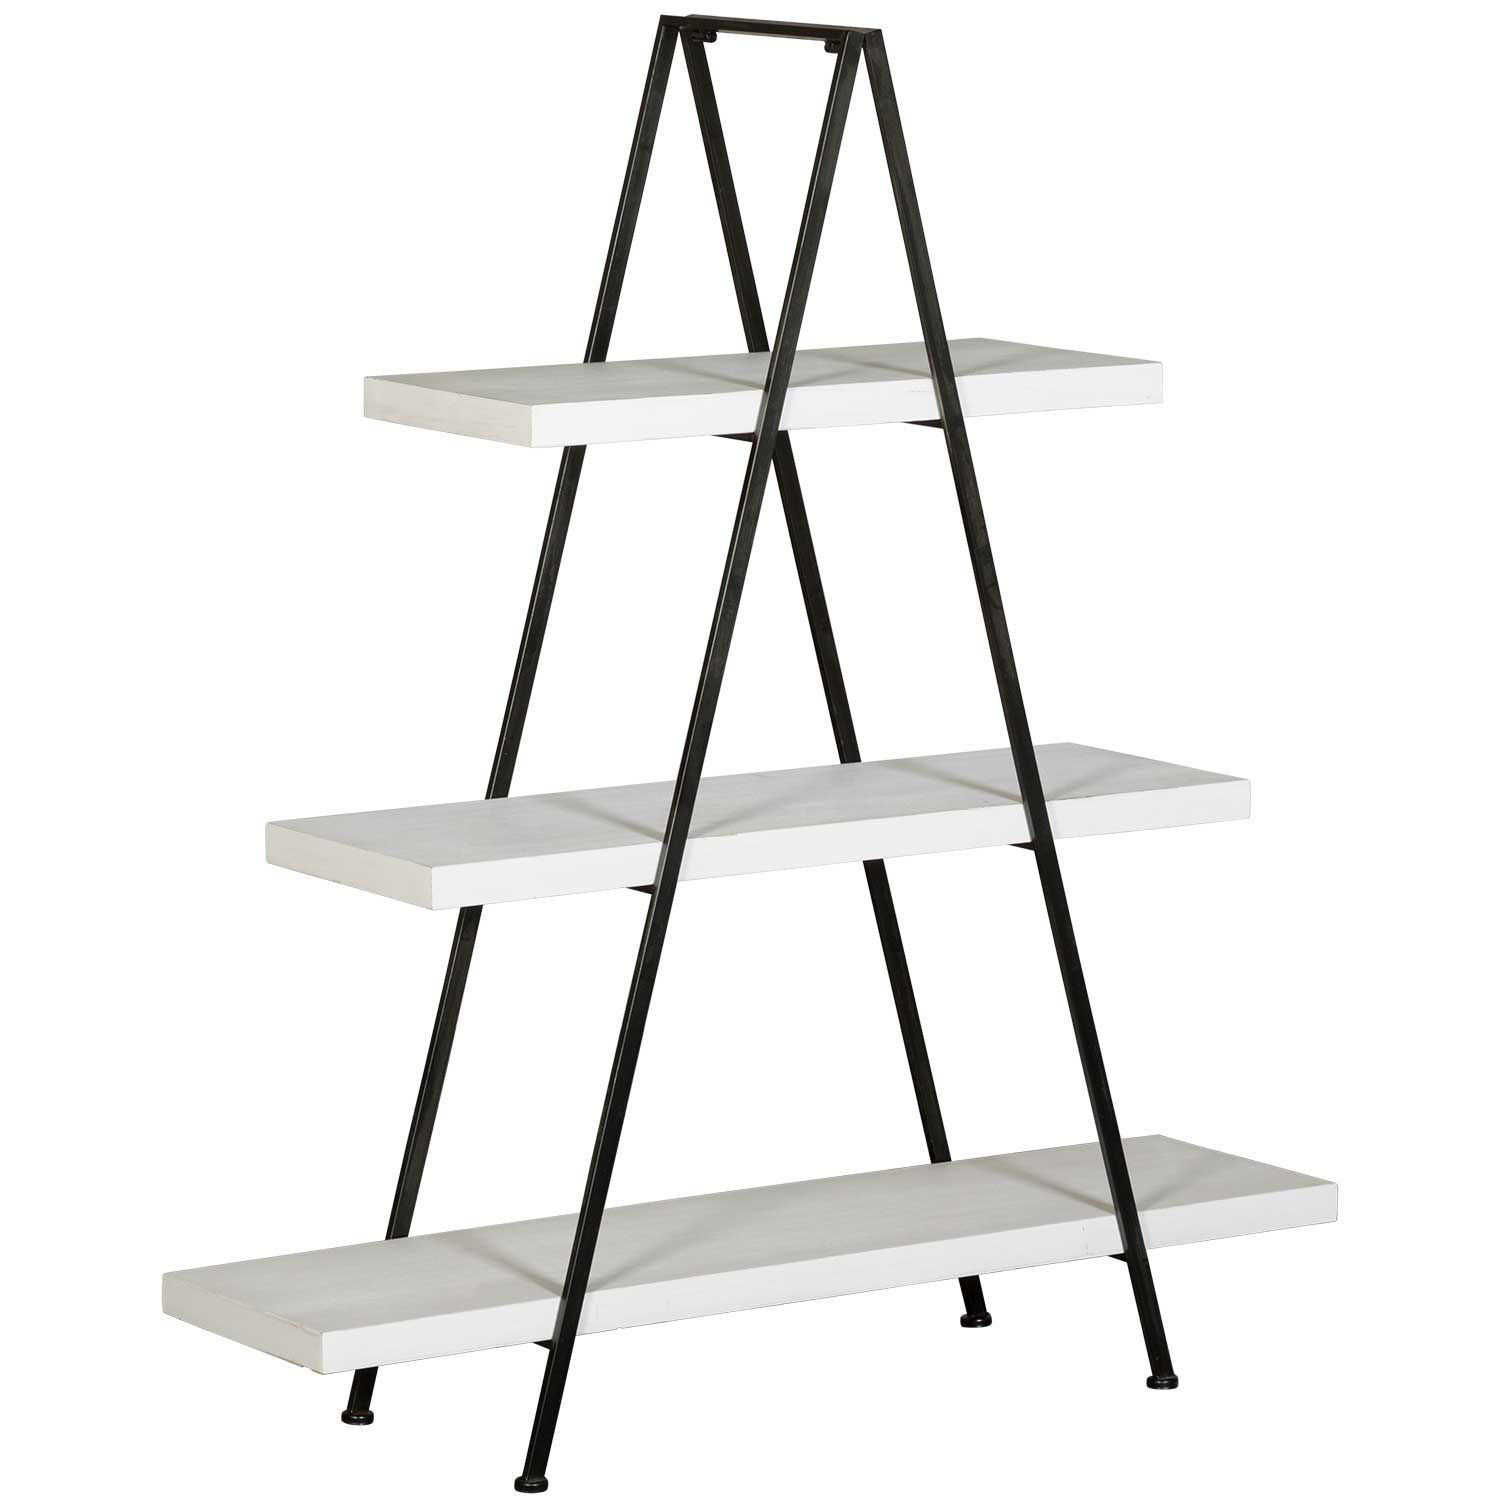 https://www.afw.com/images/thumbs/0118814_white-wood-and-metal-triangle-shelf.jpeg